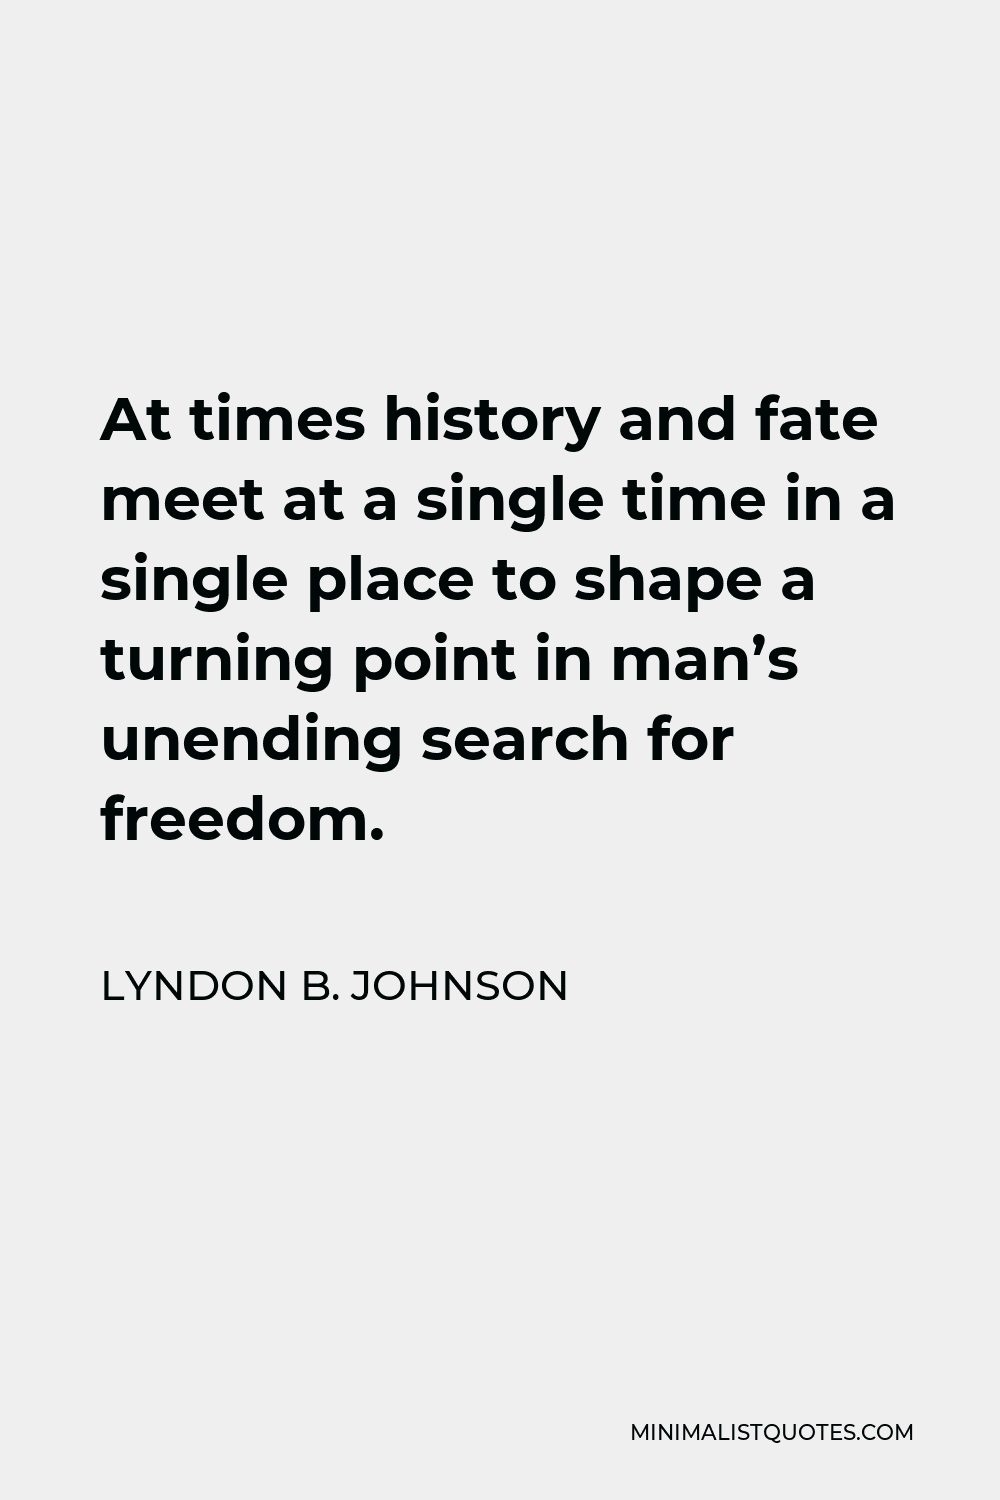 Lyndon B. Johnson Quote - At times history and fate meet at a single time in a single place to shape a turning point in man’s unending search for freedom.